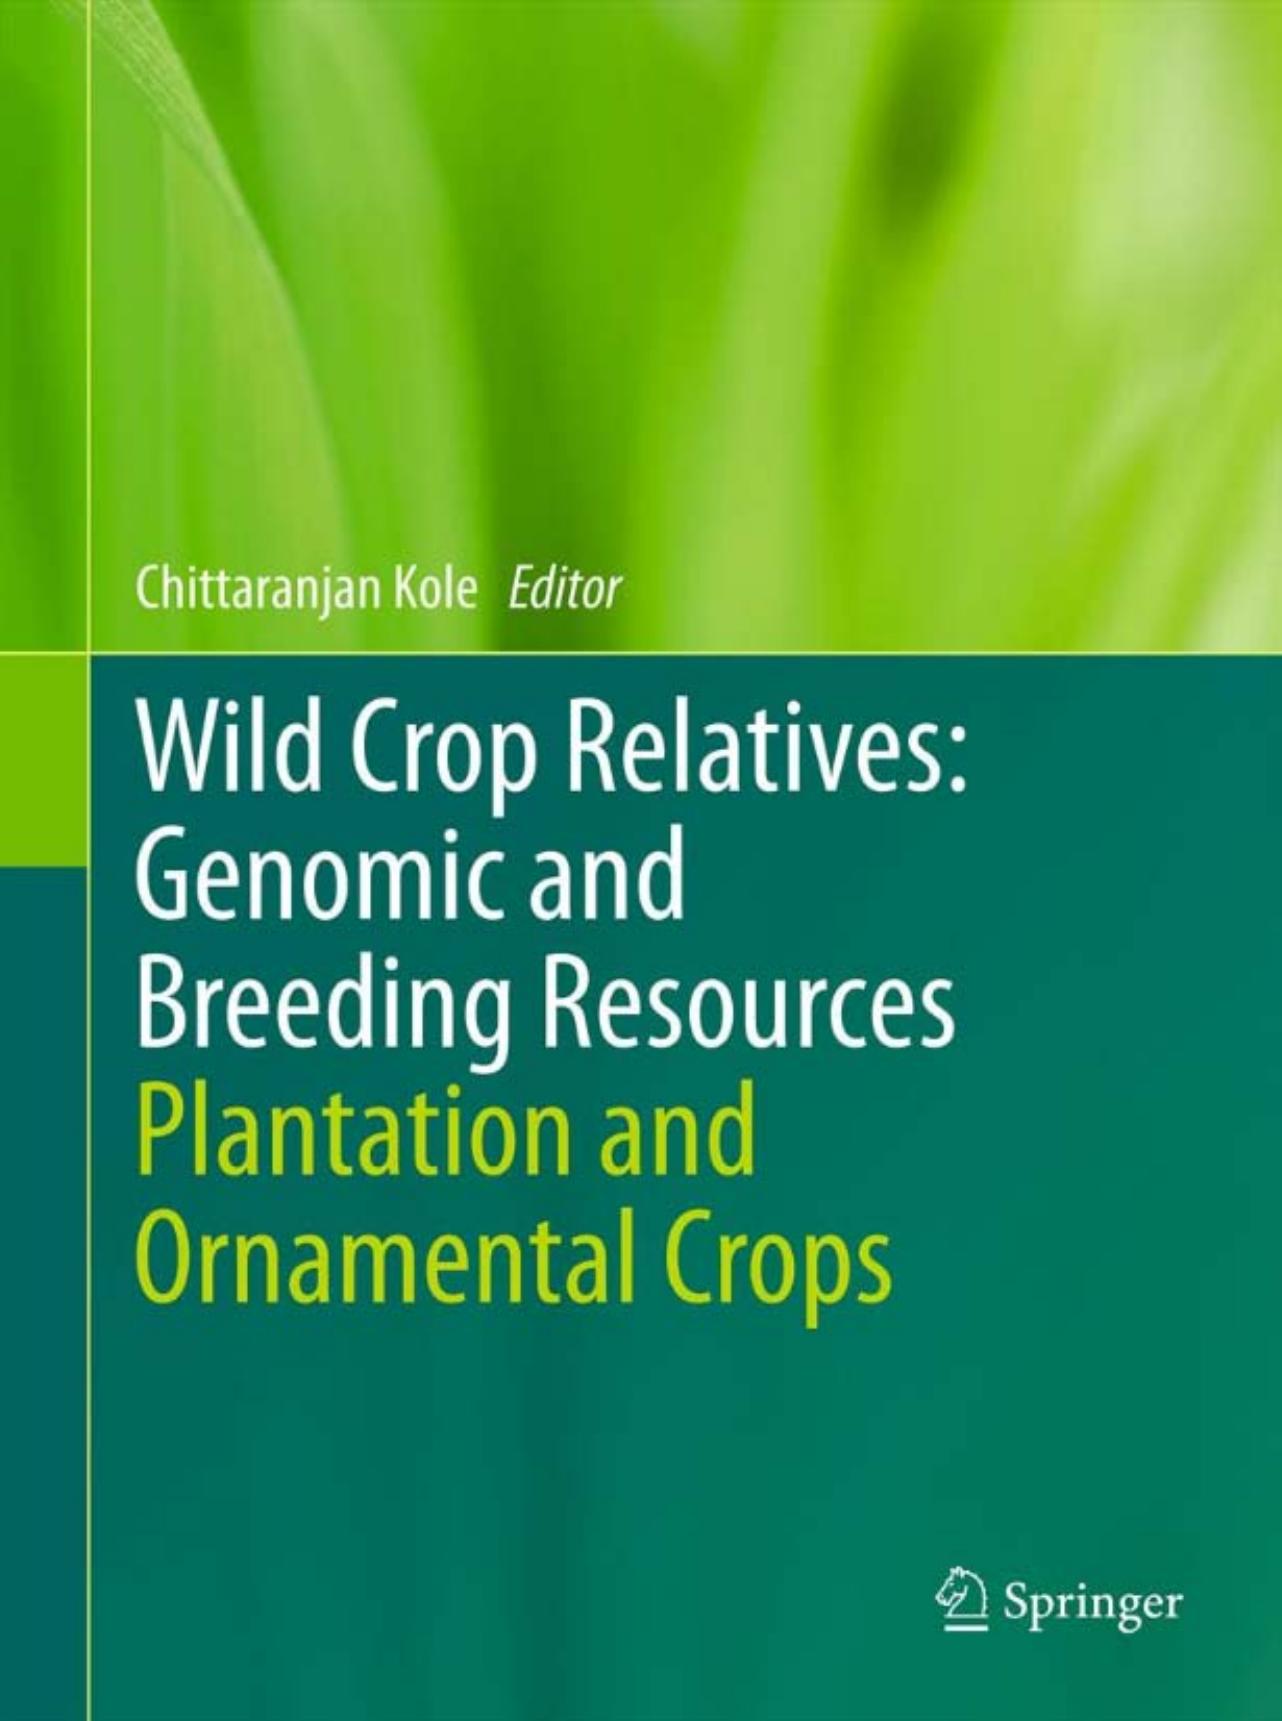 Wild Crop Relatives: Genomic and Breeding Resources: Plantation and Ornamental Crops